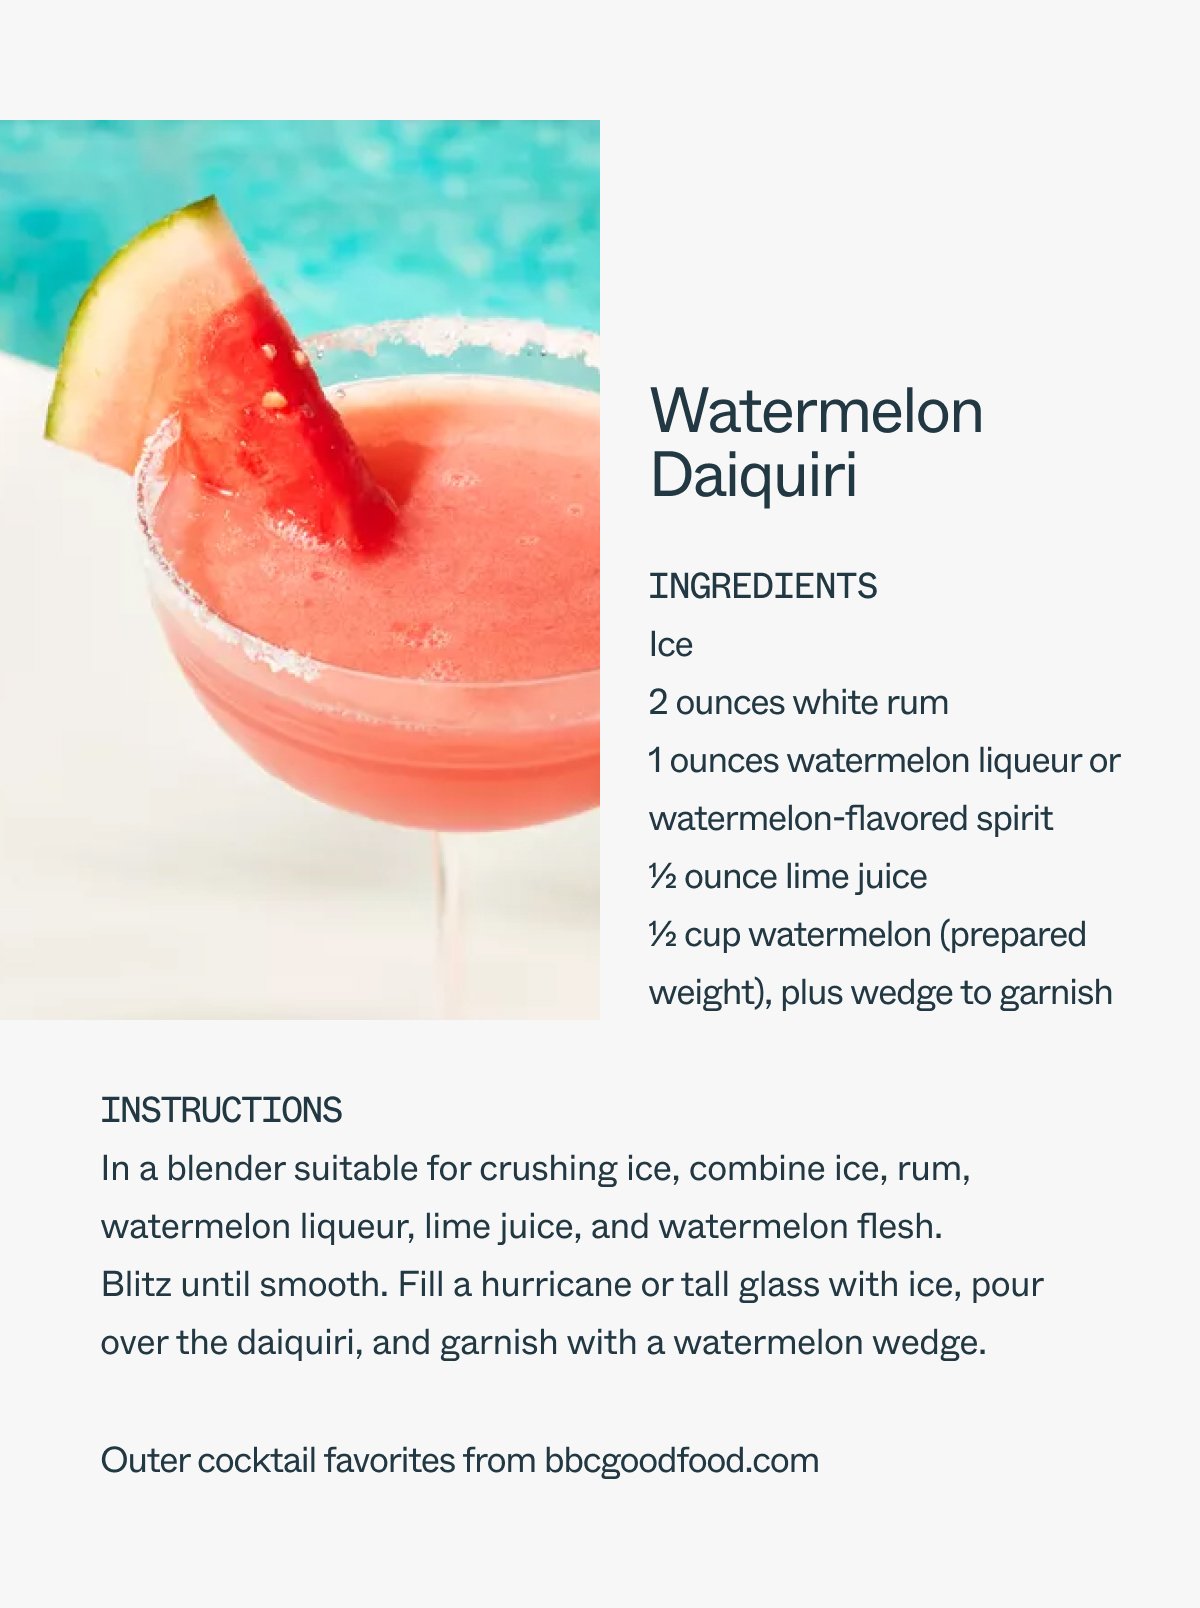 Watermelon Daiquiri Ingredients Ice 2 ounces white rum 1 ounces watermelon liqueur or watermelon-flavored spirit 1/2 ounce lime juice 1/2 cup watermelon (prepared weight), plus wedge to garnish Instructions In a blender suitable for crushing ice, combine ice, rum, watermelon liqueur, lime juice, and watermelon flesh. Blitz until smooth. Fill a hurricane or tall glass with ice, pour over the daiquiri, and garnish with a watermelon wedge. Outer cocktail favorites from bbcgoodfood.com